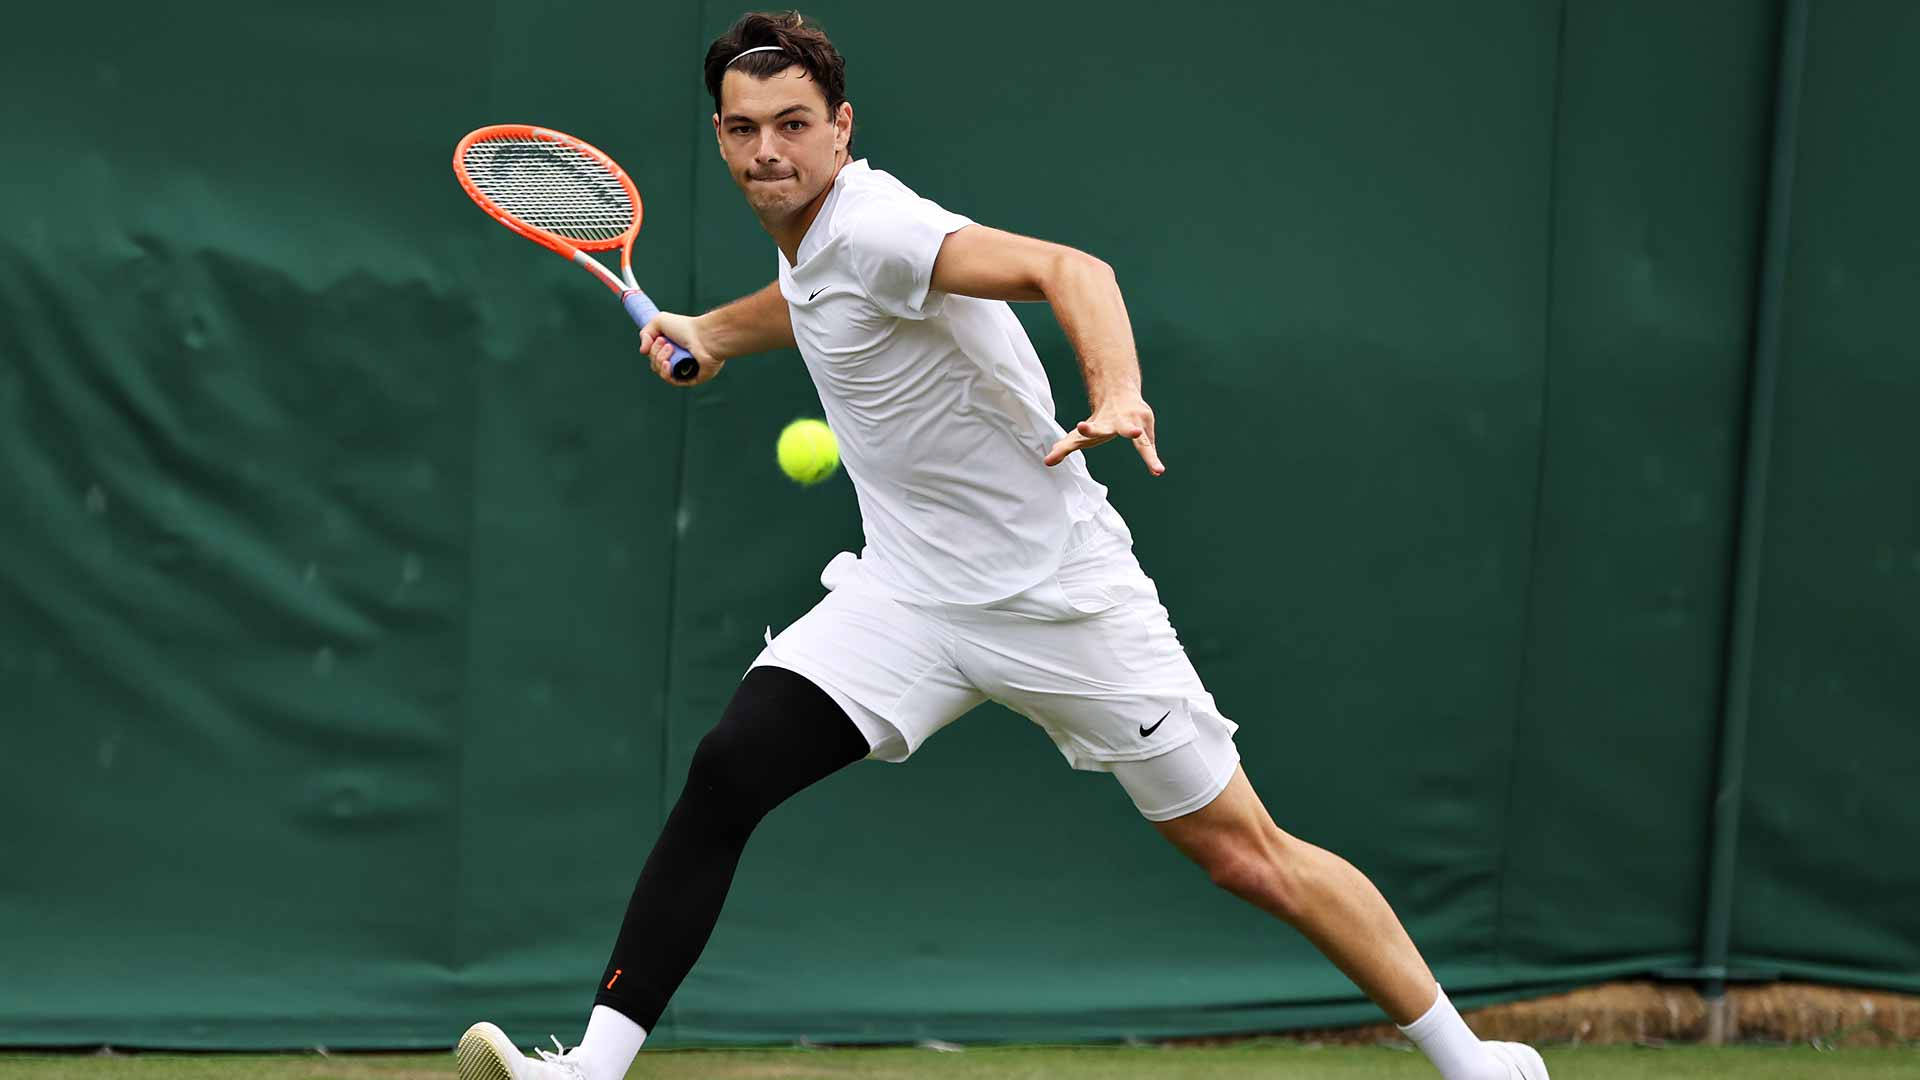 Taylor Fritz Performing Forehand Shot In Tennis